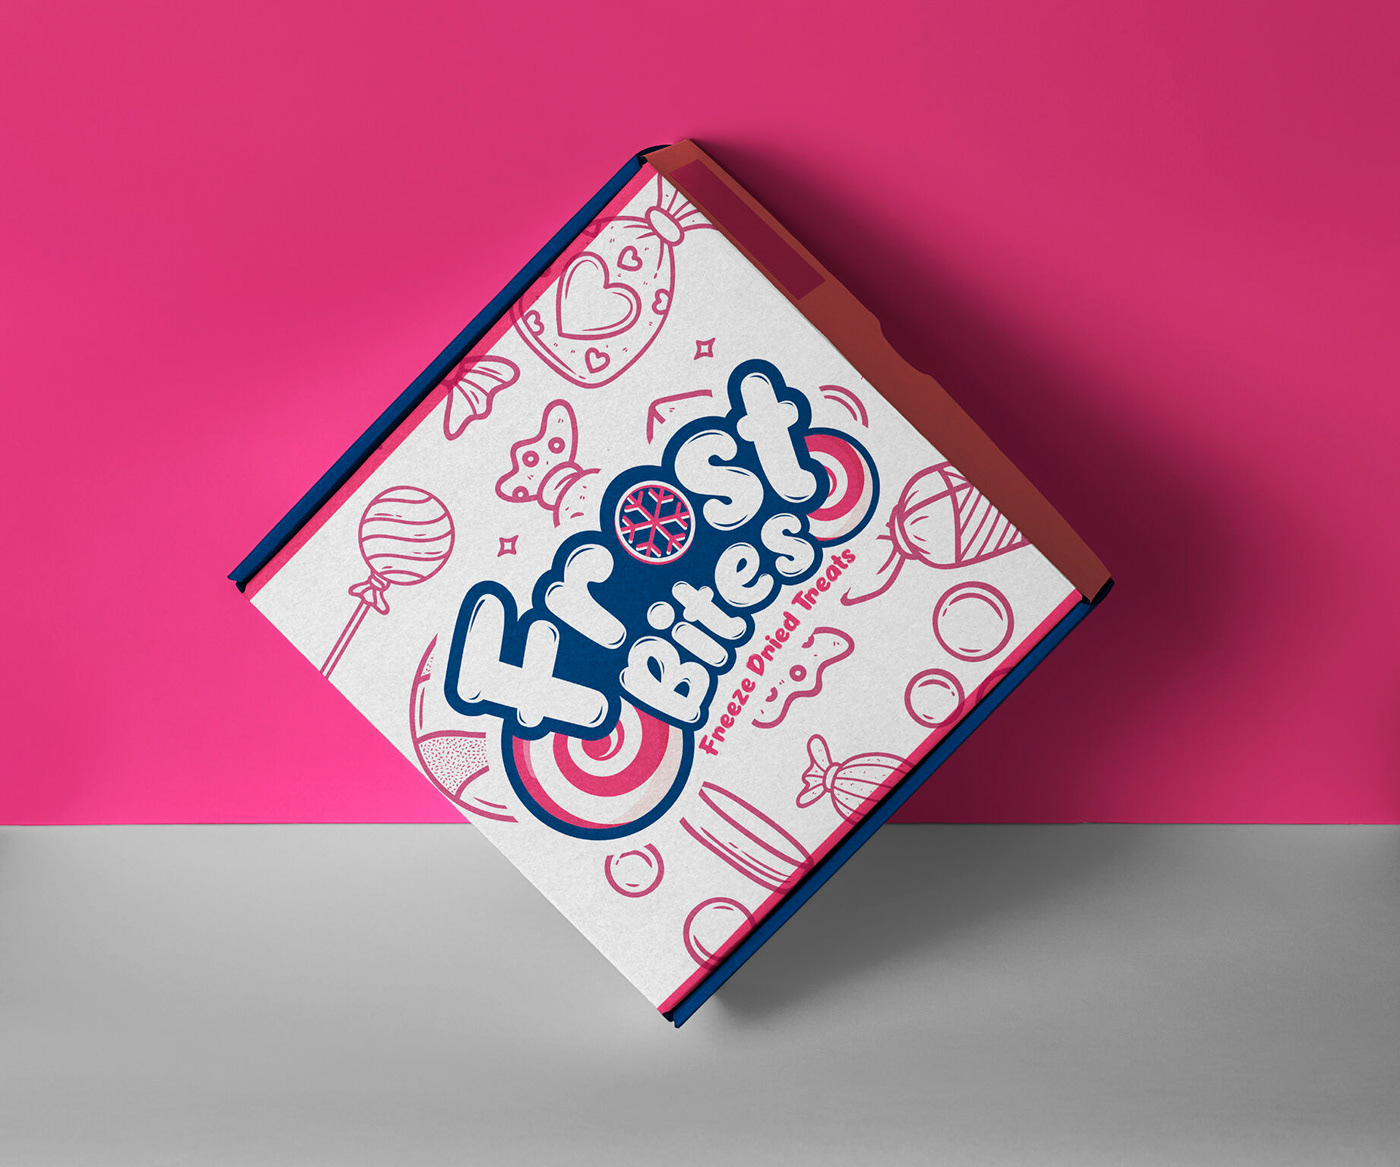 Packaging Design for Frost bite Candy company.